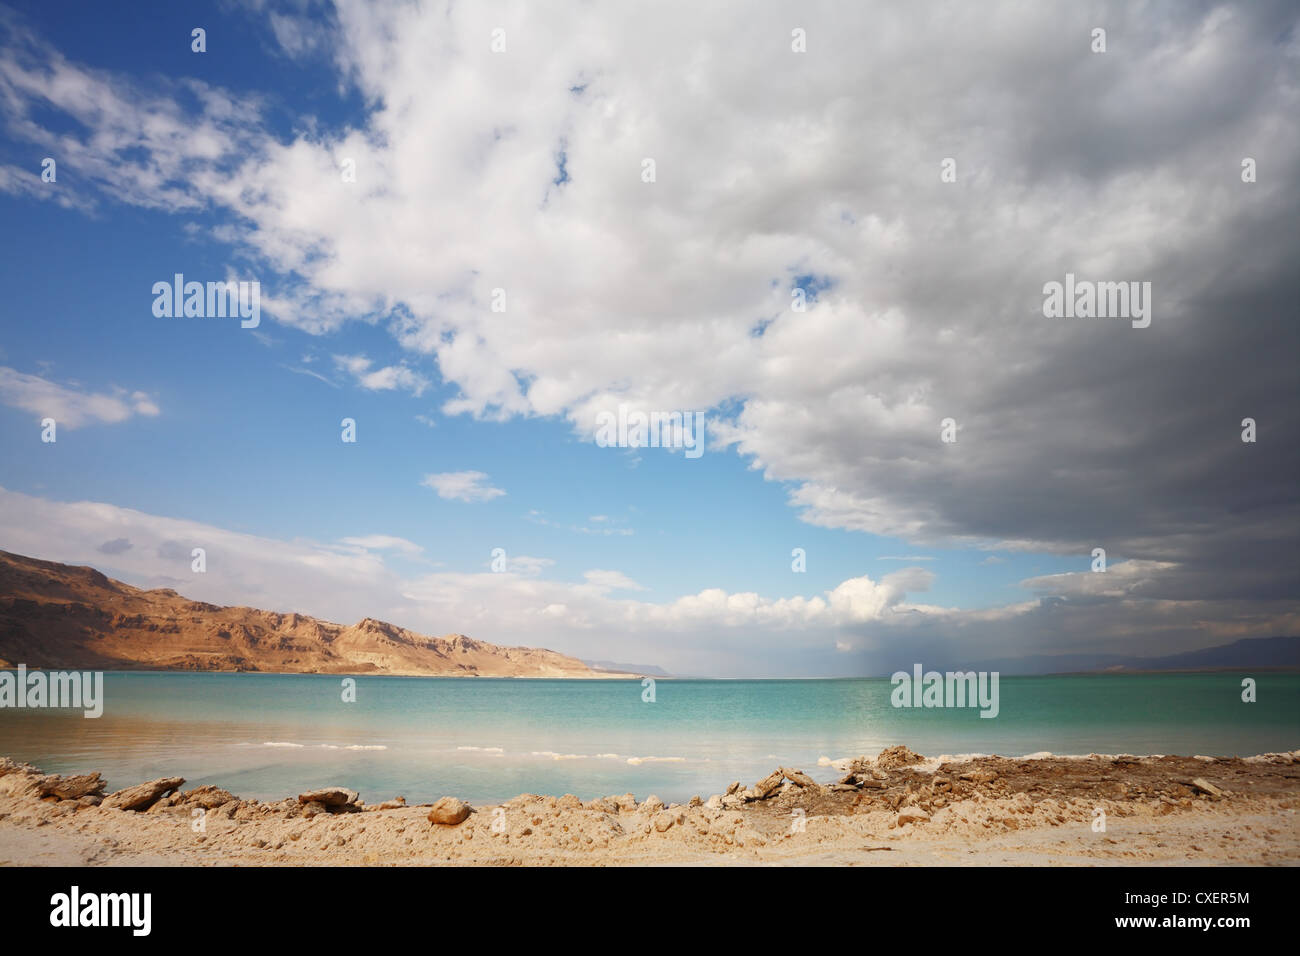 Sunset on the Dead Sea in Israel Stock Photo